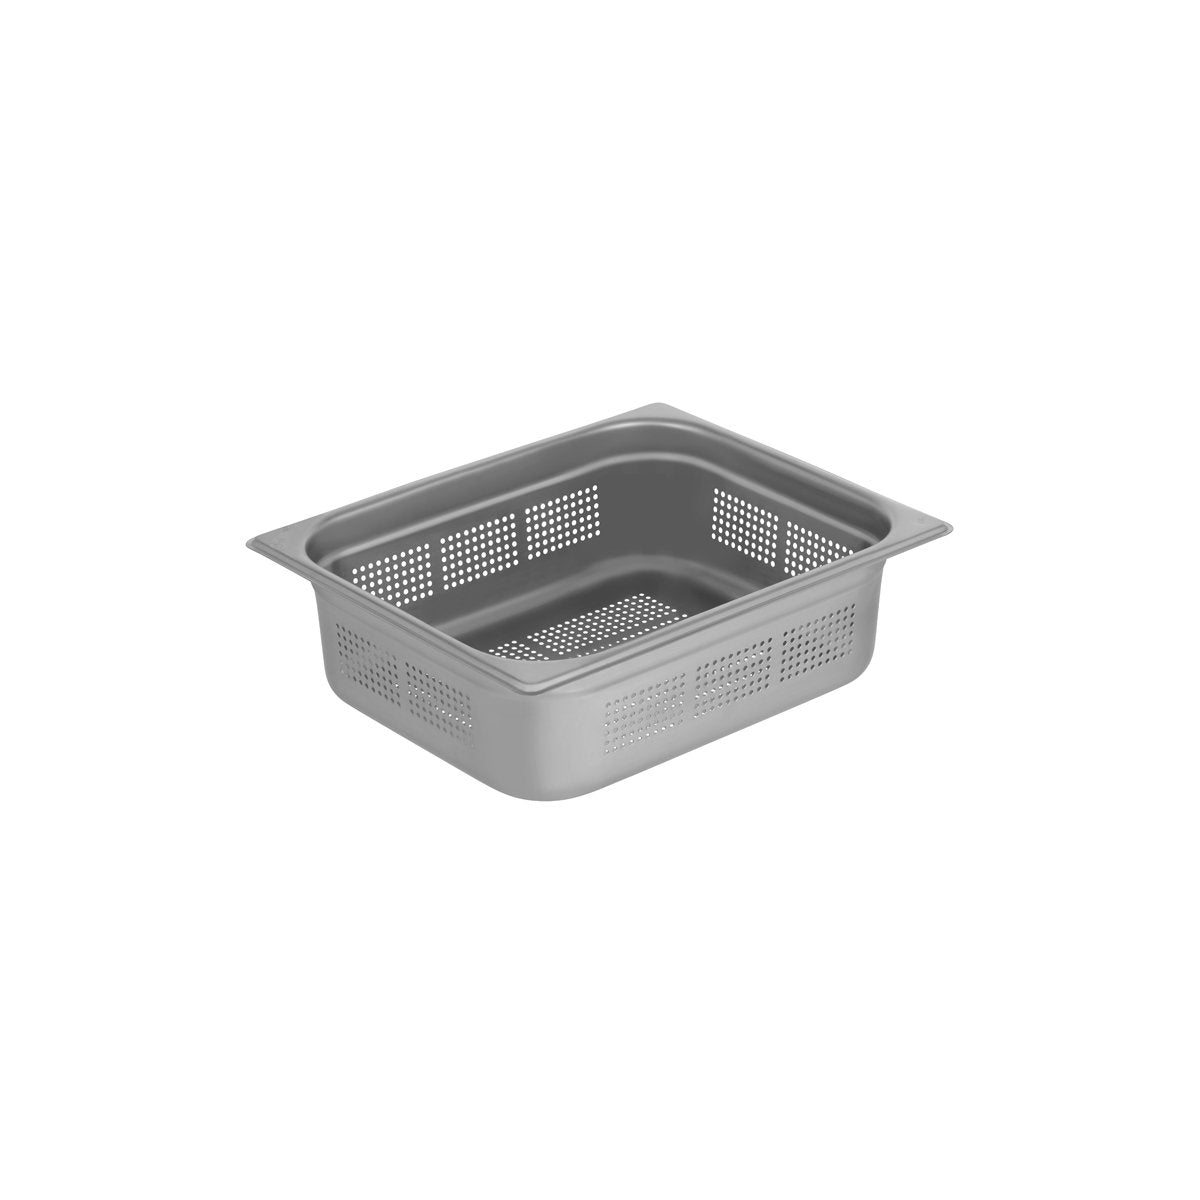 GNP-12100 Chef Inox Gastronorm Pan Perforated 1/2 Size 100mm Tomkin Australia Hospitality Supplies